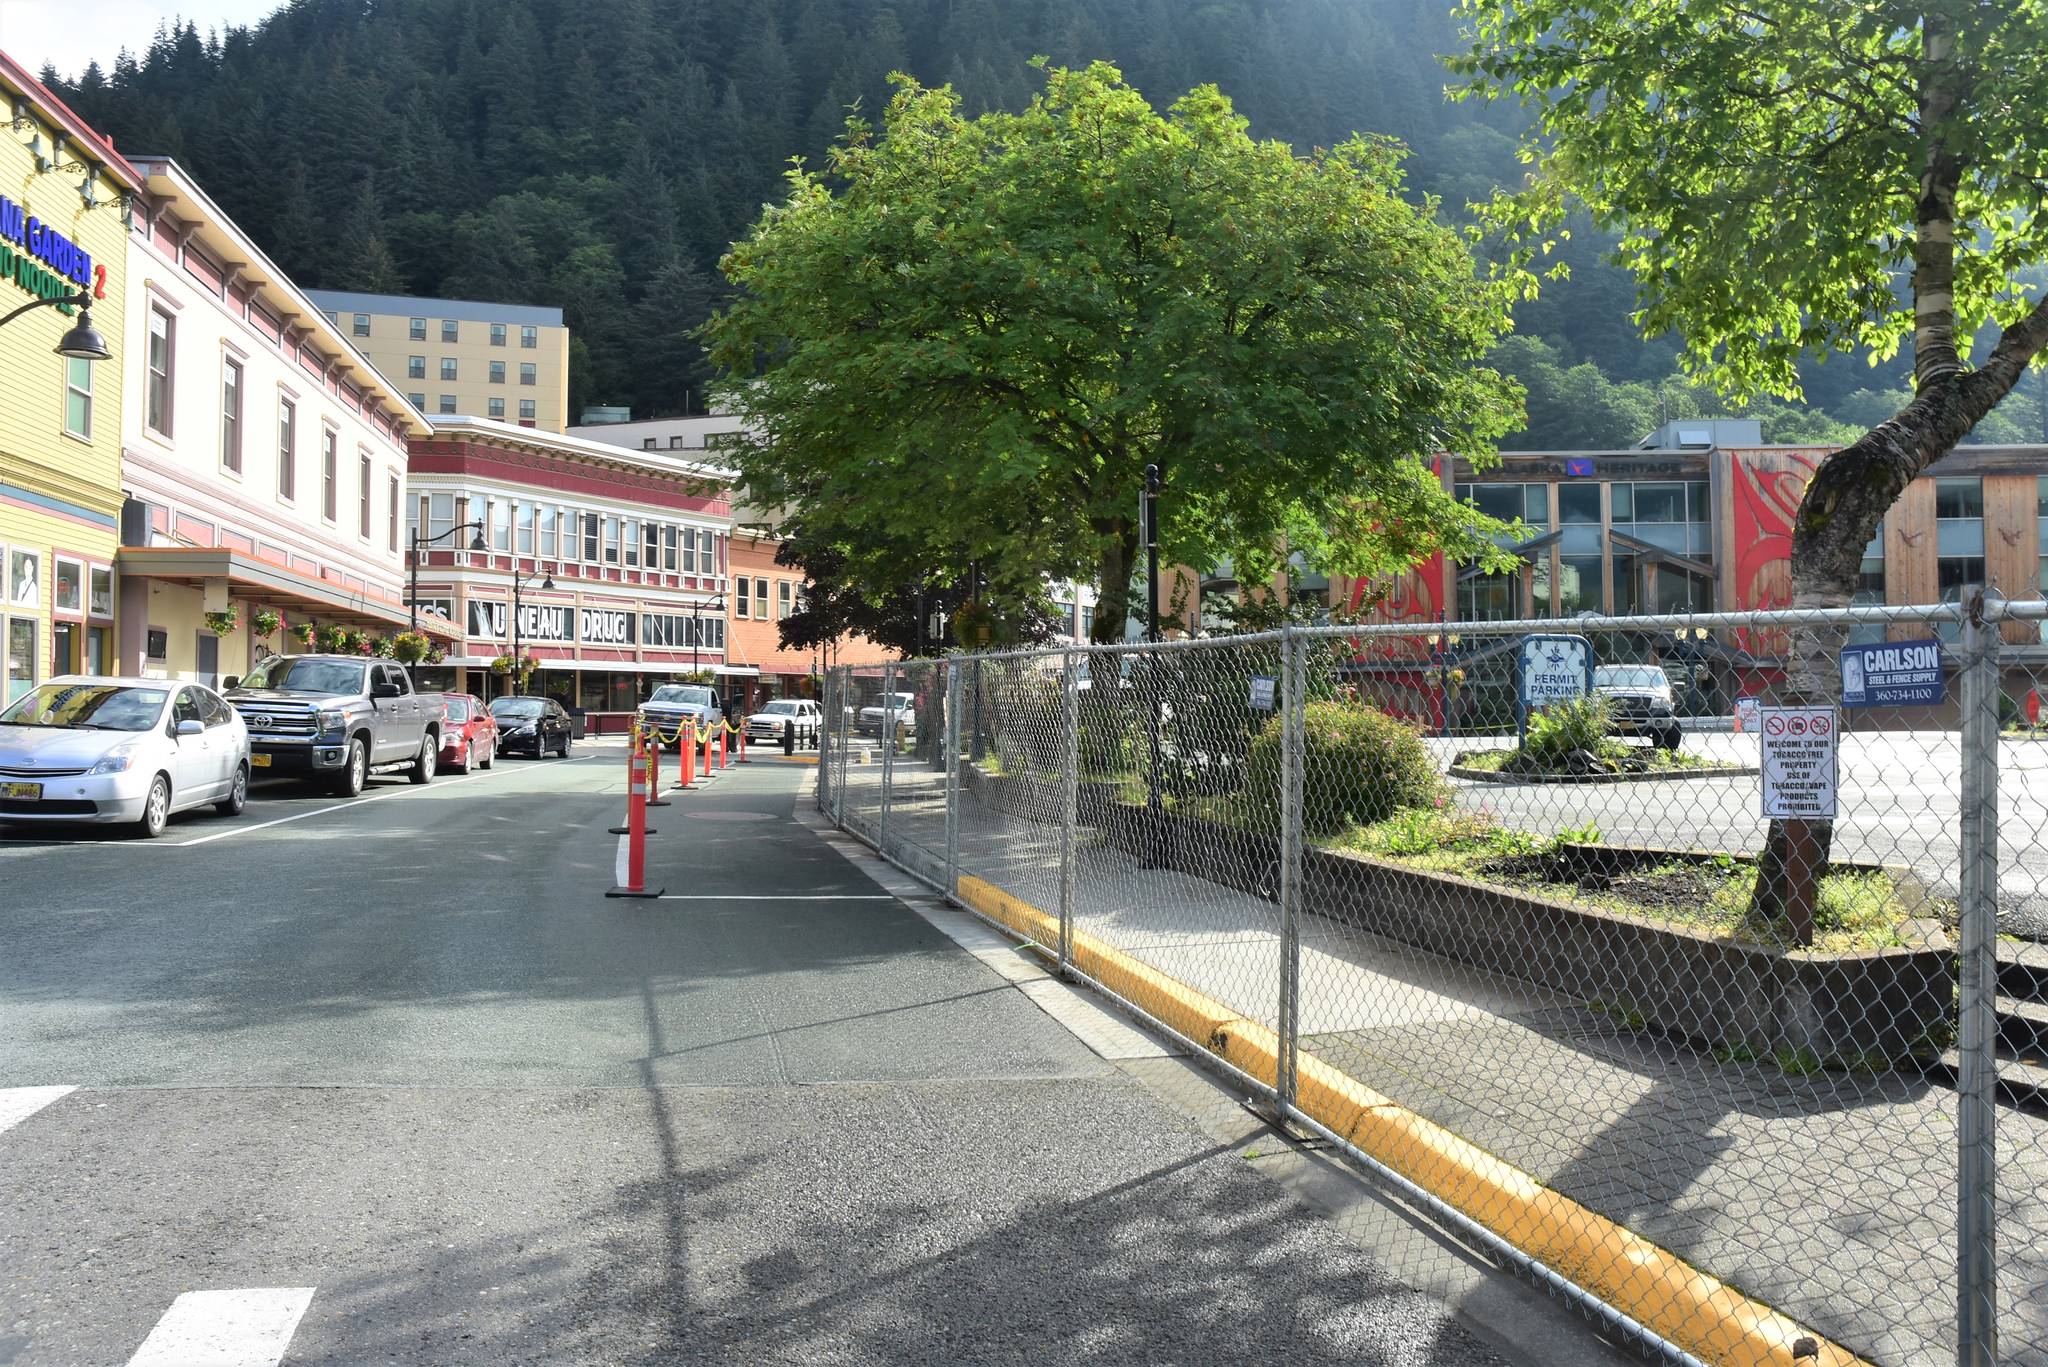 Peter Segall / Juneau Empire Fencing goes up around the Sealaska building parking lot in downtown Juneau on Thursday. By this time next year, SHI hopes to have its arts campus open and running, if not yet fully finished.